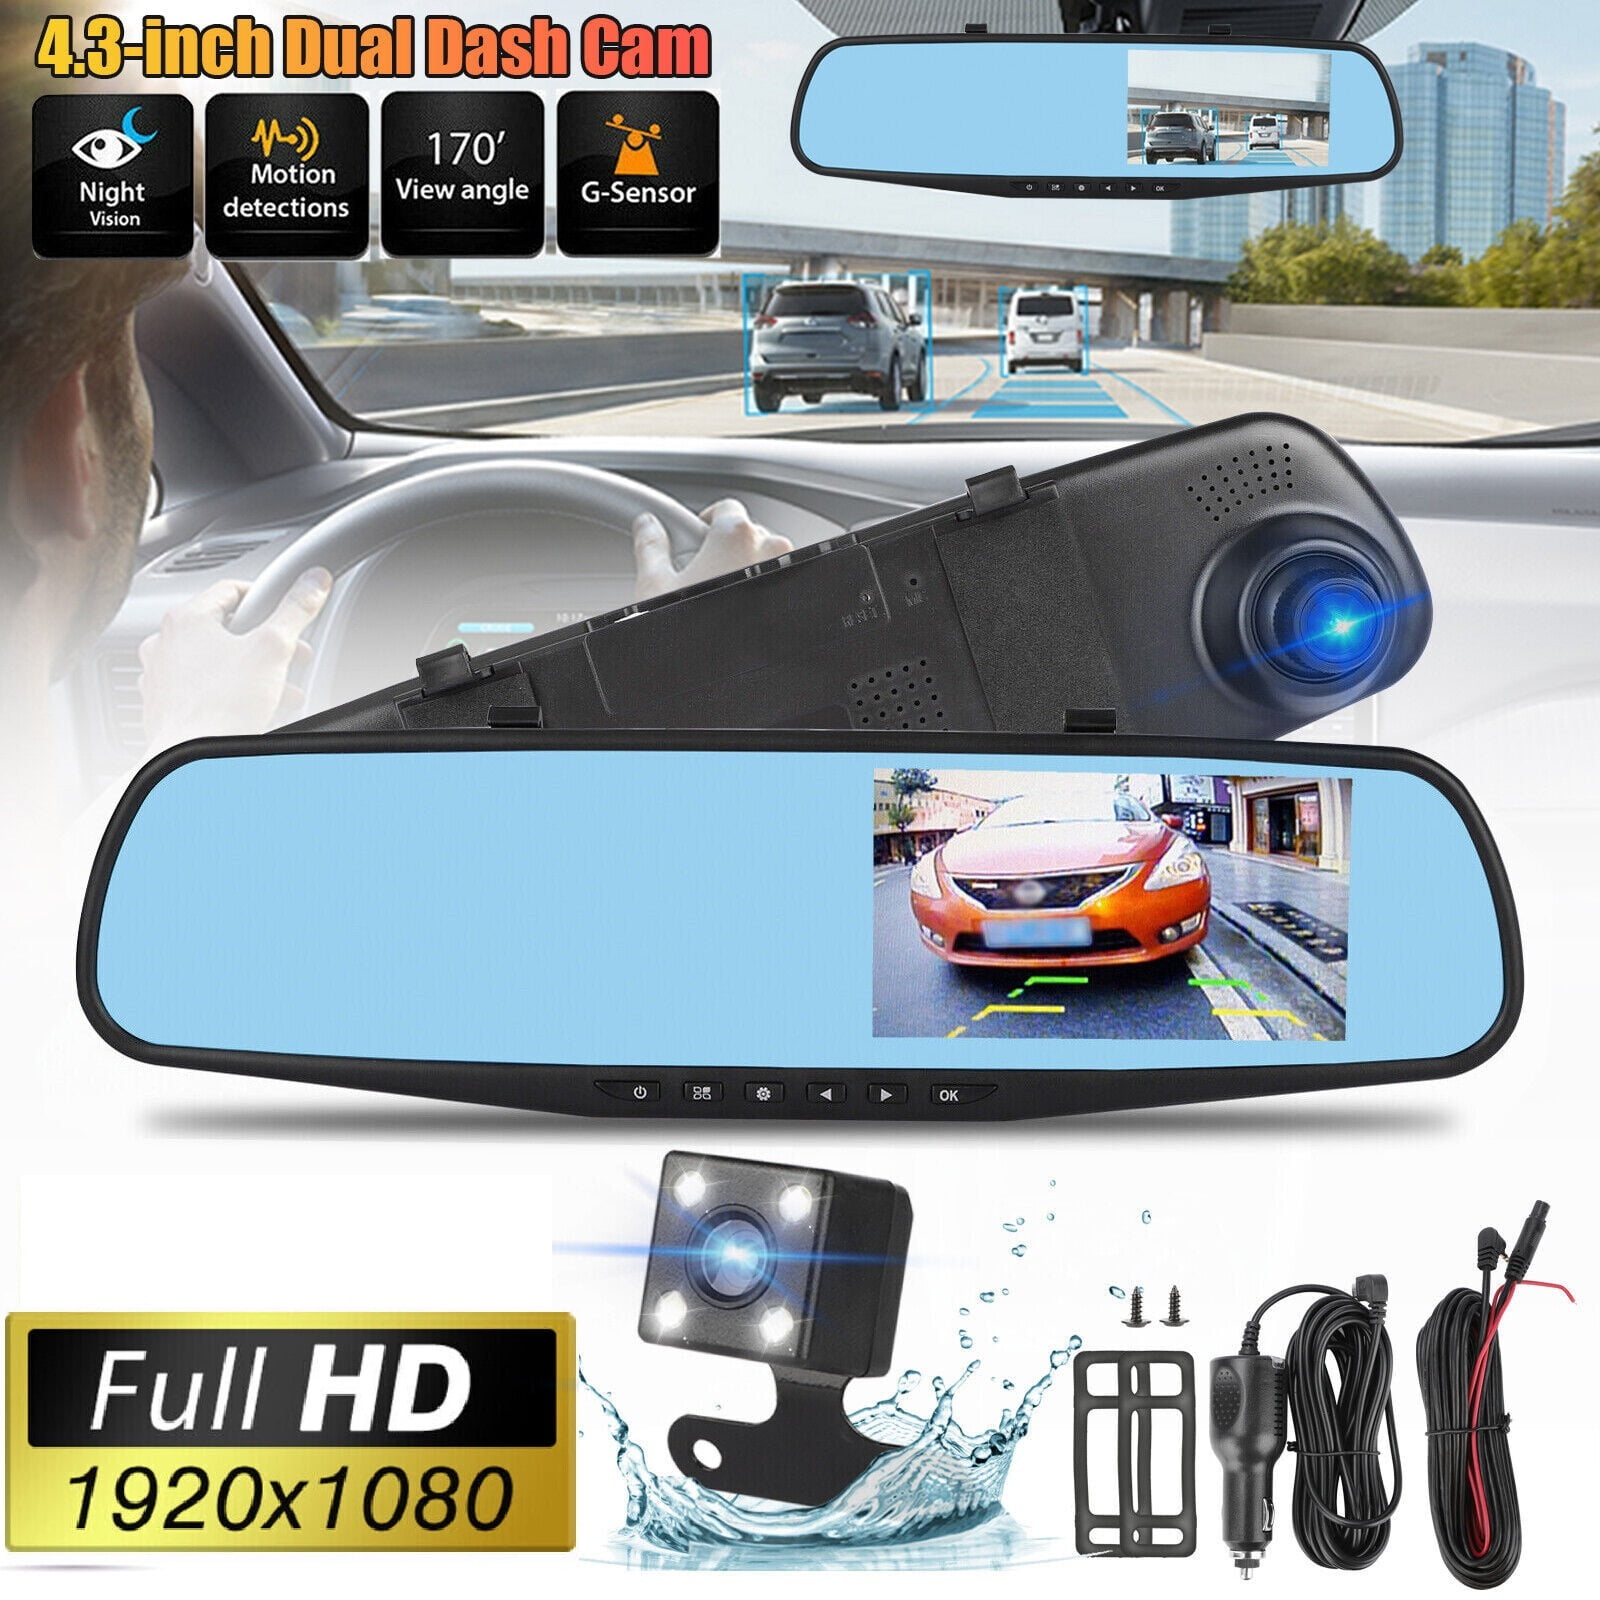 GOODTS Dash Cam 1080p FHD Car Camera Recorder 2.45 inch LCD Screen 170Wide Angle, Dash Camera for Cars with G-Sensor Loop Recording WDR Motion